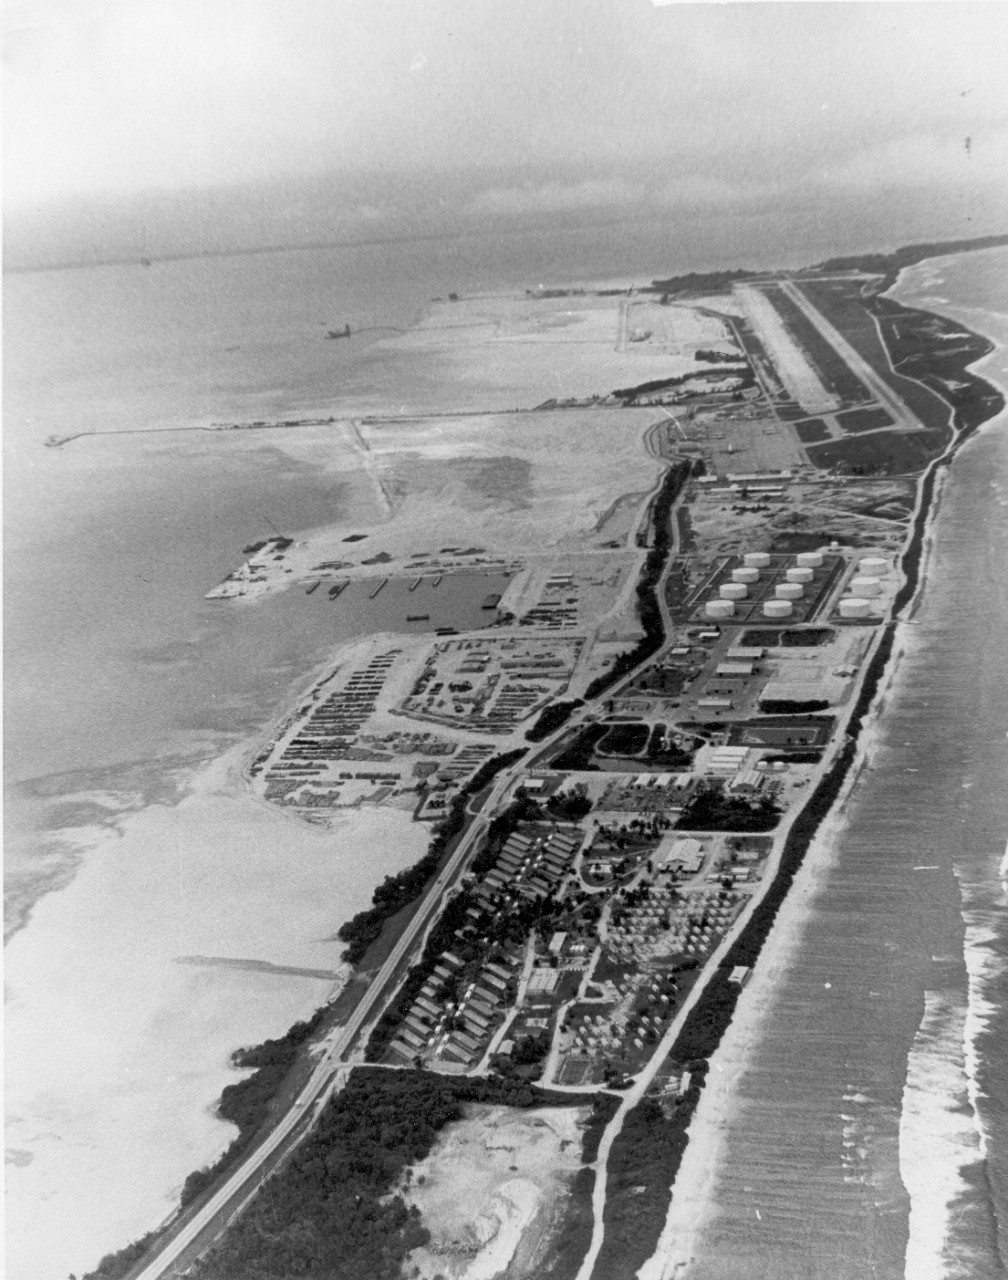 Black and white photograph of an aerial view of the runway built on Diego Garcia island, circa 1980s